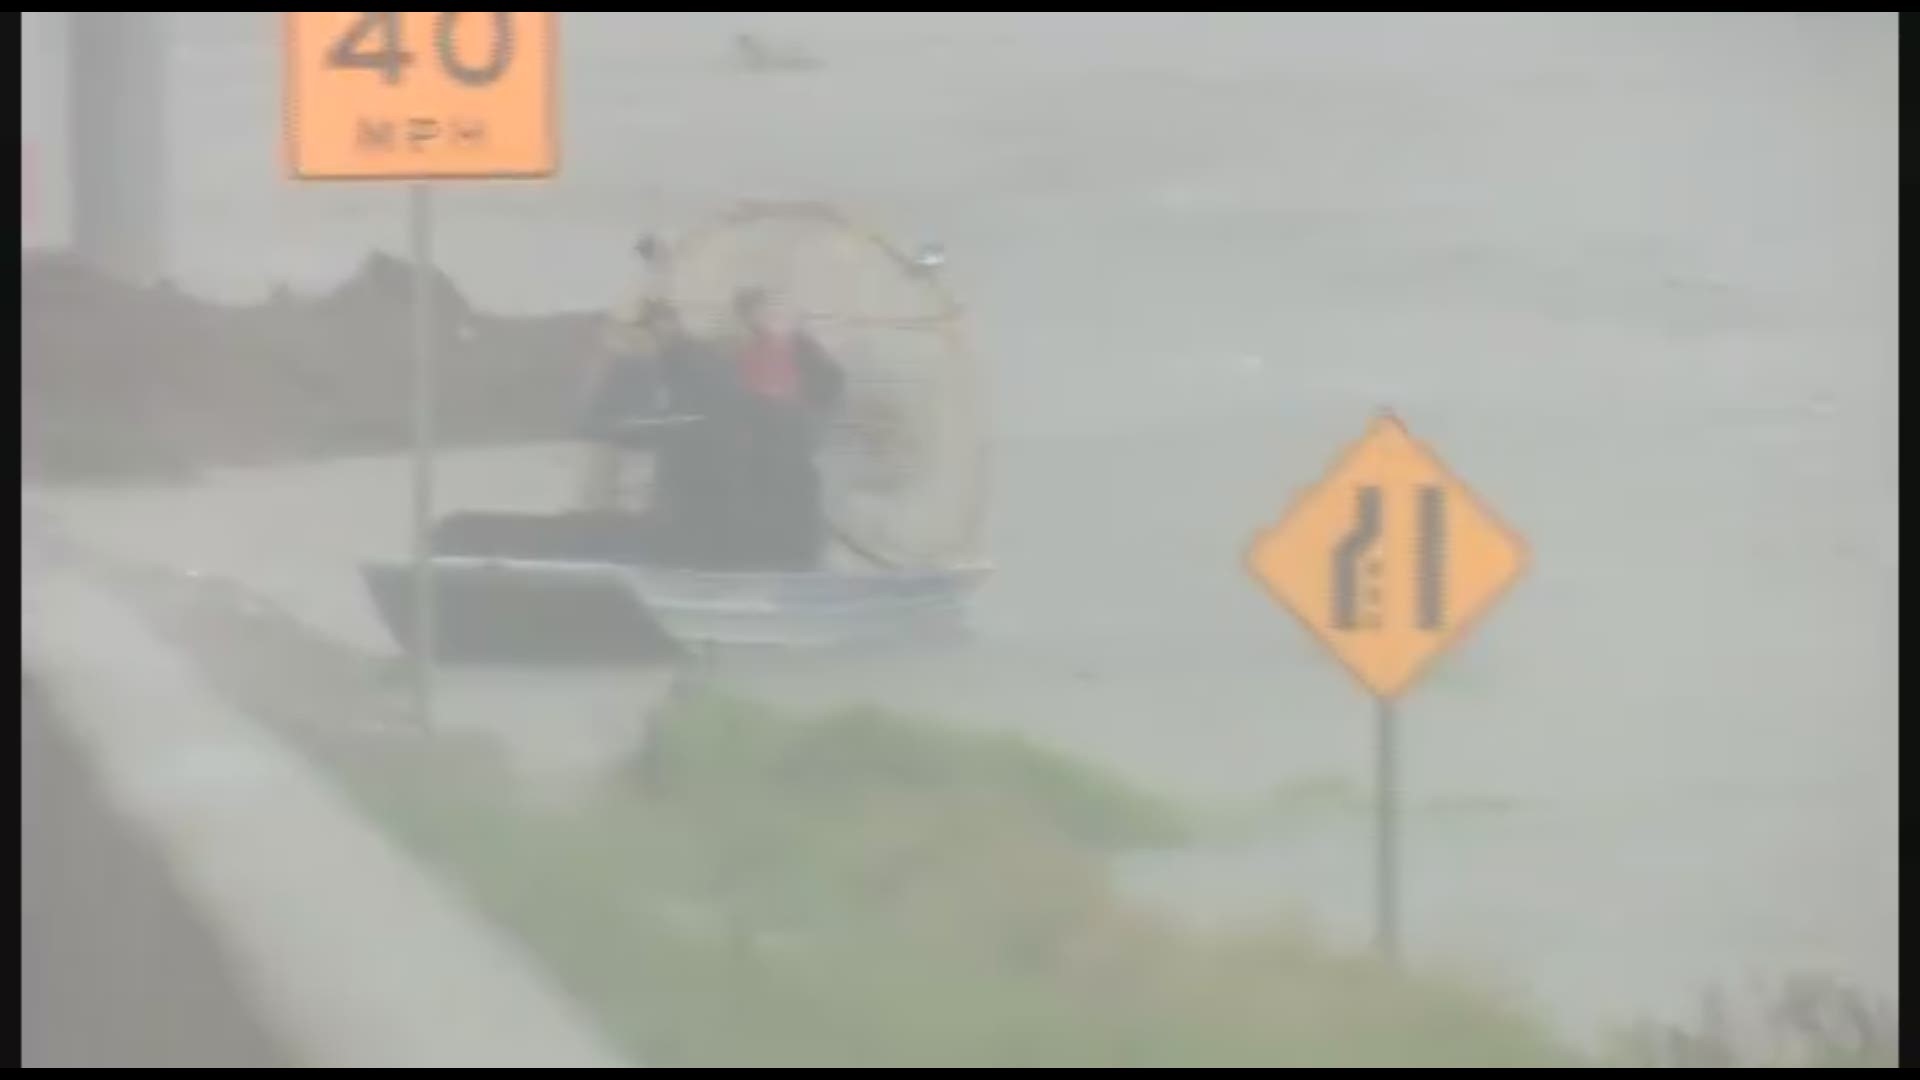 A Harris County Sheriff rescue team saved a truck driver from floodwaters after he found himself trapped in his truck.